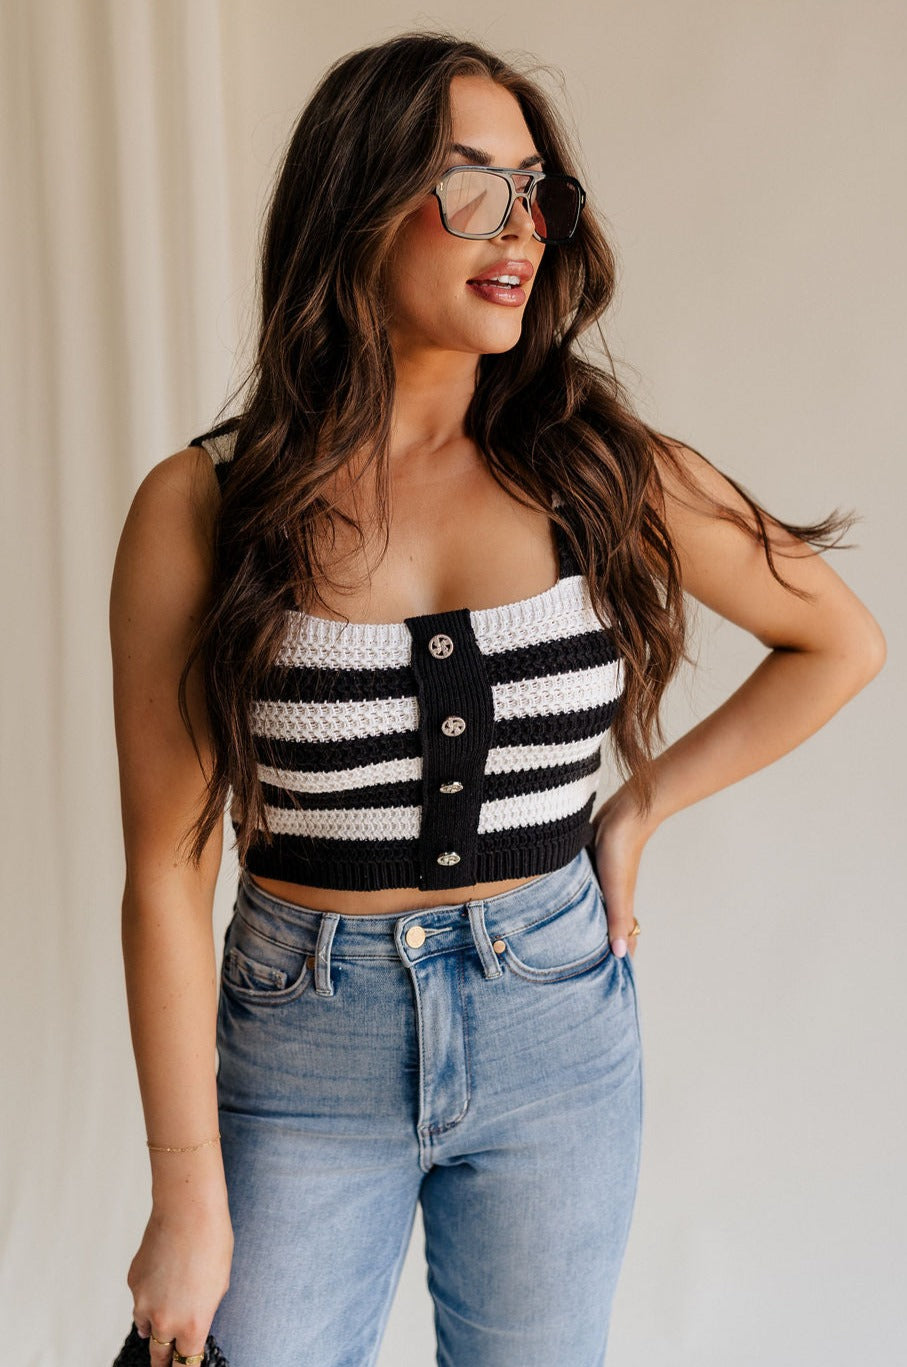 front view of female model wearing the Kai Black & White Stripe Knit Tank which features Black and White Crochet Knit, Stripe Pattern, Cropped Waist, Rhinestone Button Up, Square Neckline and Sleeveless